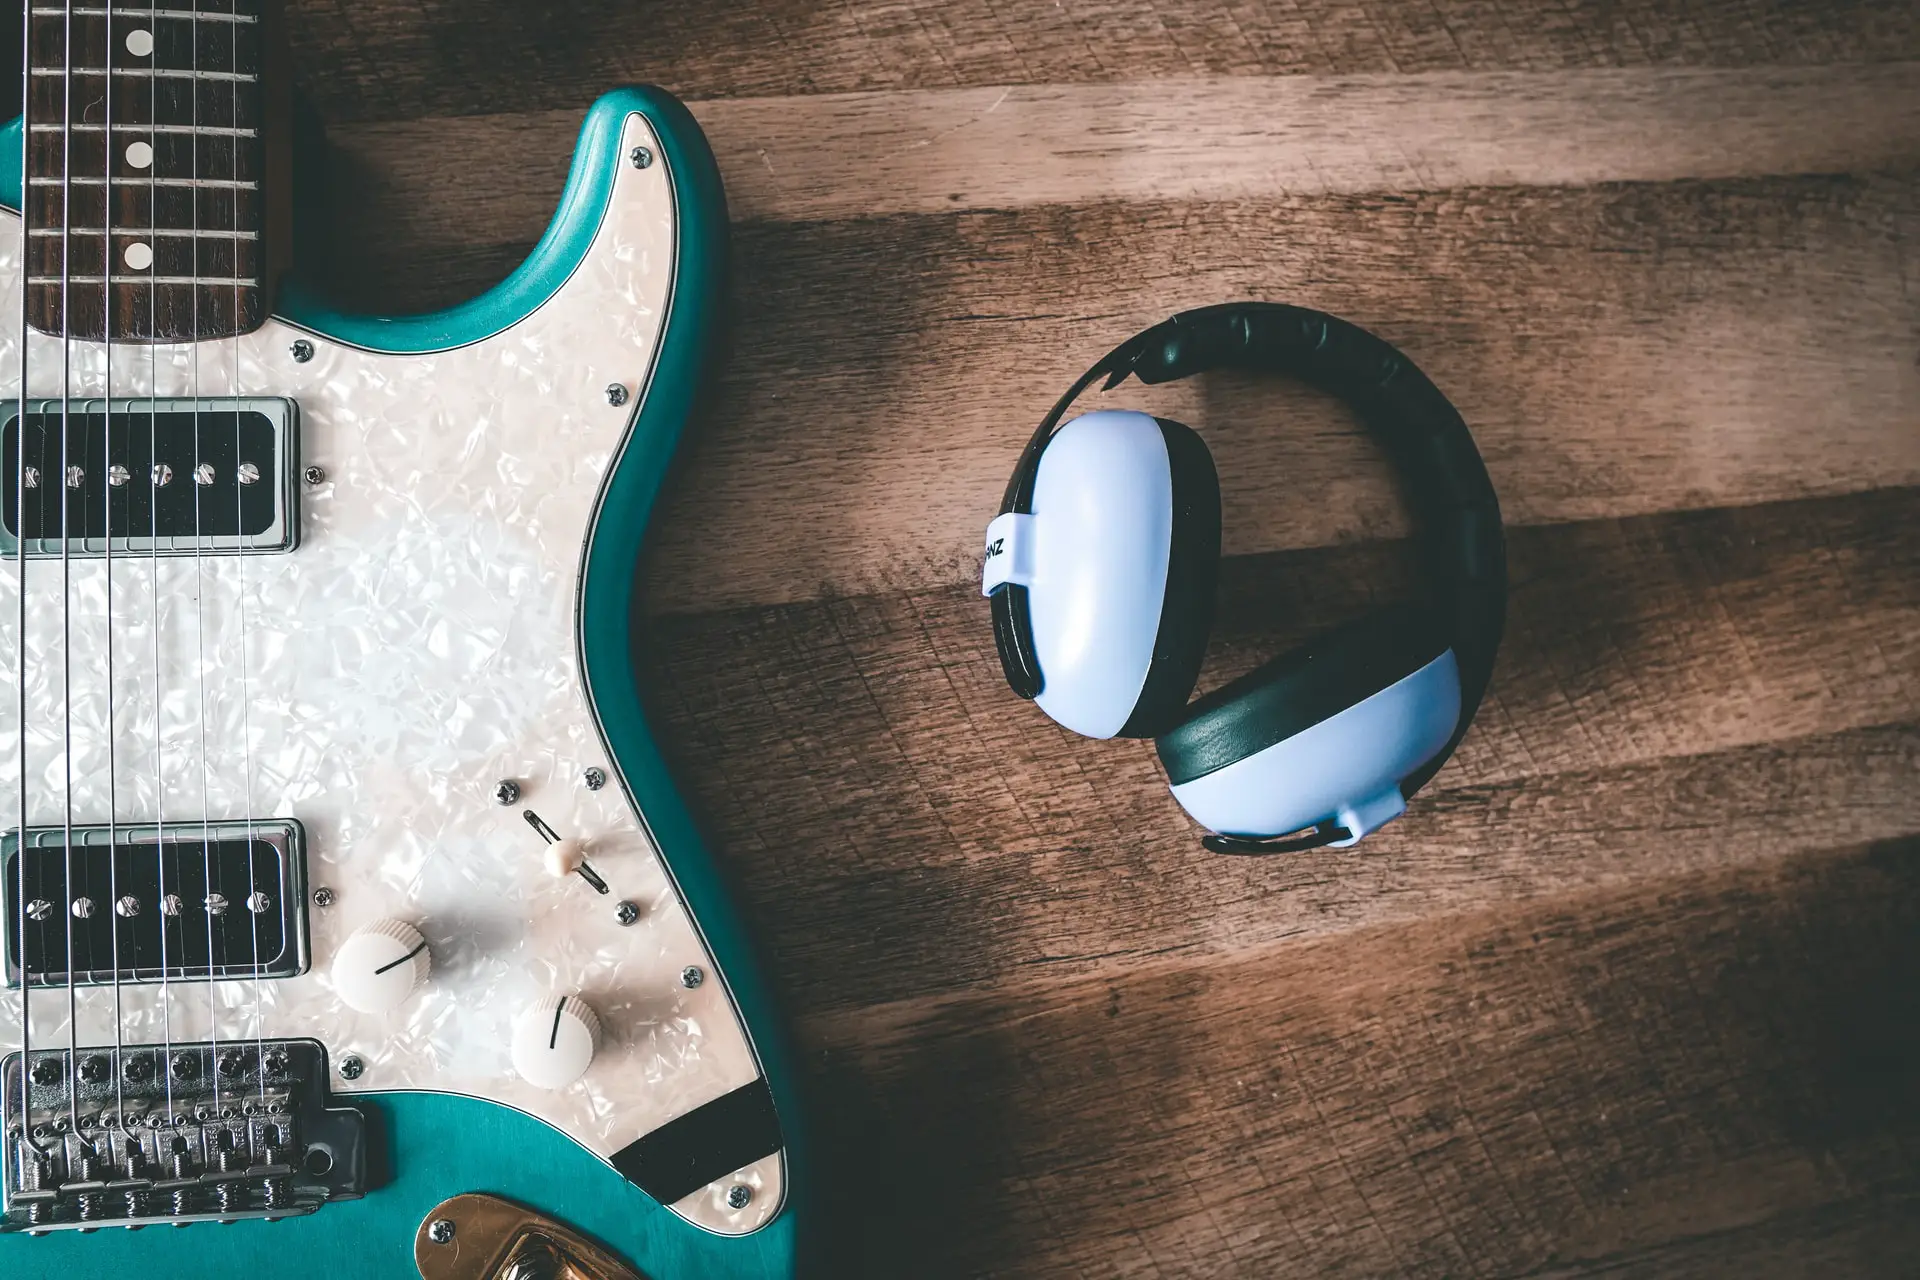 Playing Guitar With Headphone: Is It Bad? (Pros & Cons)